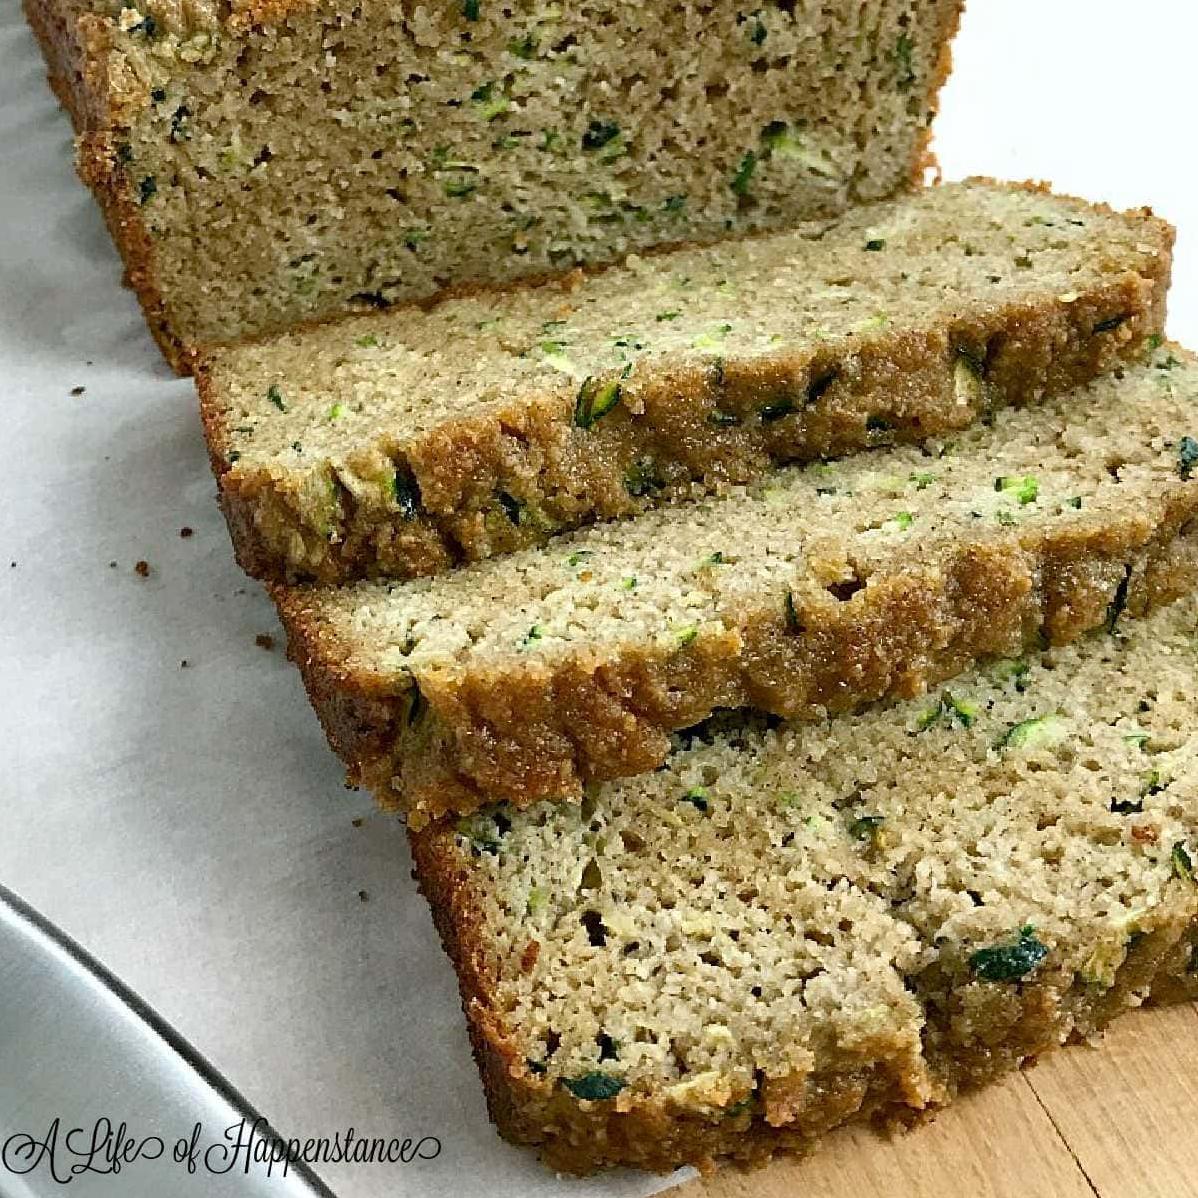  This loaf is packed with organic ingredients for a nutritious touch.